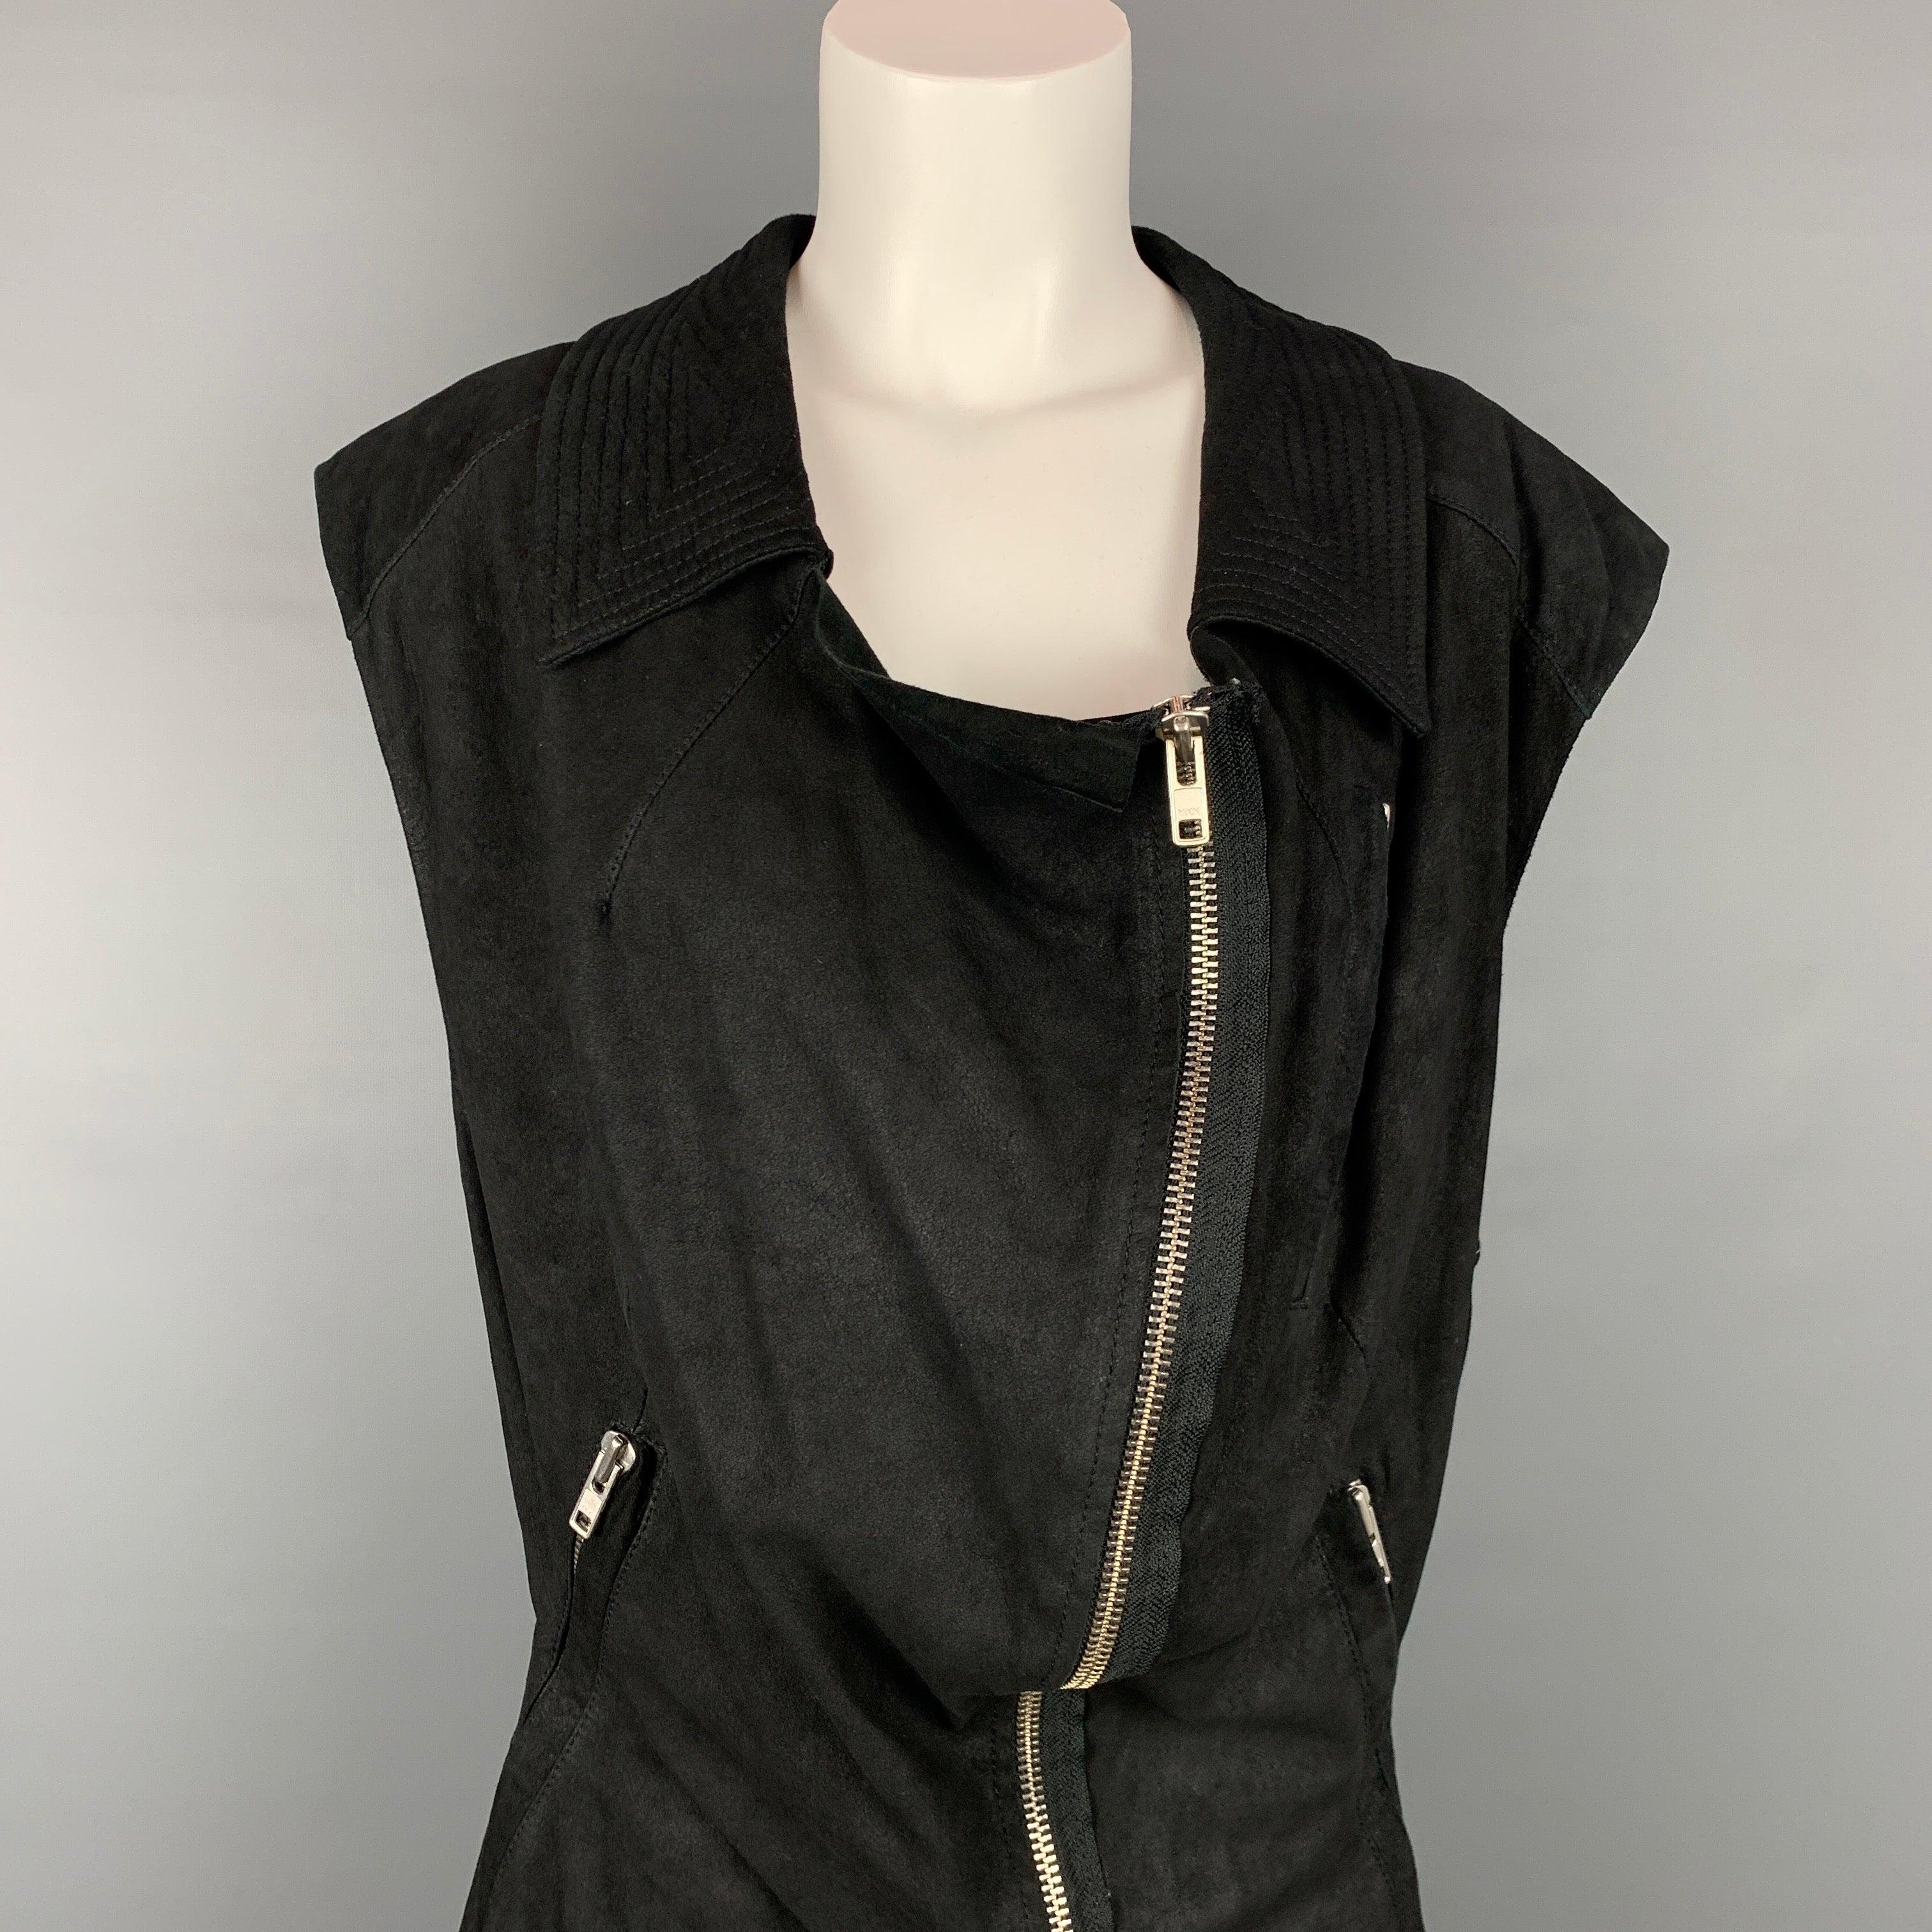 HAIDER ACKERMANN vest comes in a black suede with no liner featuring silver tone hardware, loose fit, spread collar, zipper pockets, and a full zip up closure. Made in Italy.Very Good
Pre-Owned Condition. 

Marked:   38 

Measurements: 
 
Shoulder: